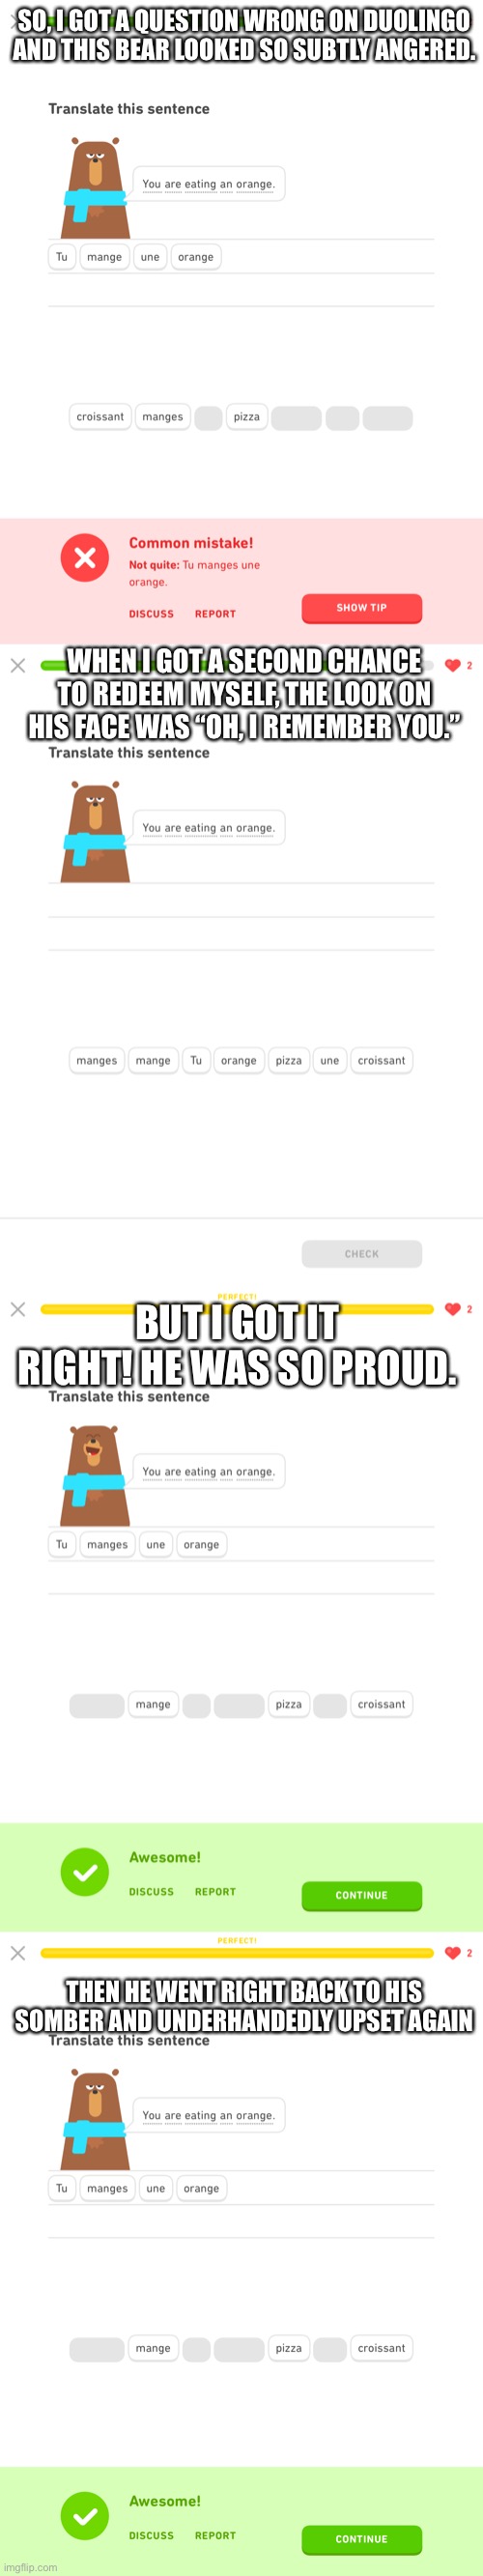 This made me laugh so hard | SO, I GOT A QUESTION WRONG ON DUOLINGO AND THIS BEAR LOOKED SO SUBTLY ANGERED. WHEN I GOT A SECOND CHANCE TO REDEEM MYSELF, THE LOOK ON HIS FACE WAS “OH, I REMEMBER YOU.”; BUT I GOT IT RIGHT! HE WAS SO PROUD. THEN HE WENT RIGHT BACK TO HIS SOMBER AND UNDERHANDEDLY UPSET AGAIN | image tagged in duolingo,bear,mad | made w/ Imgflip meme maker